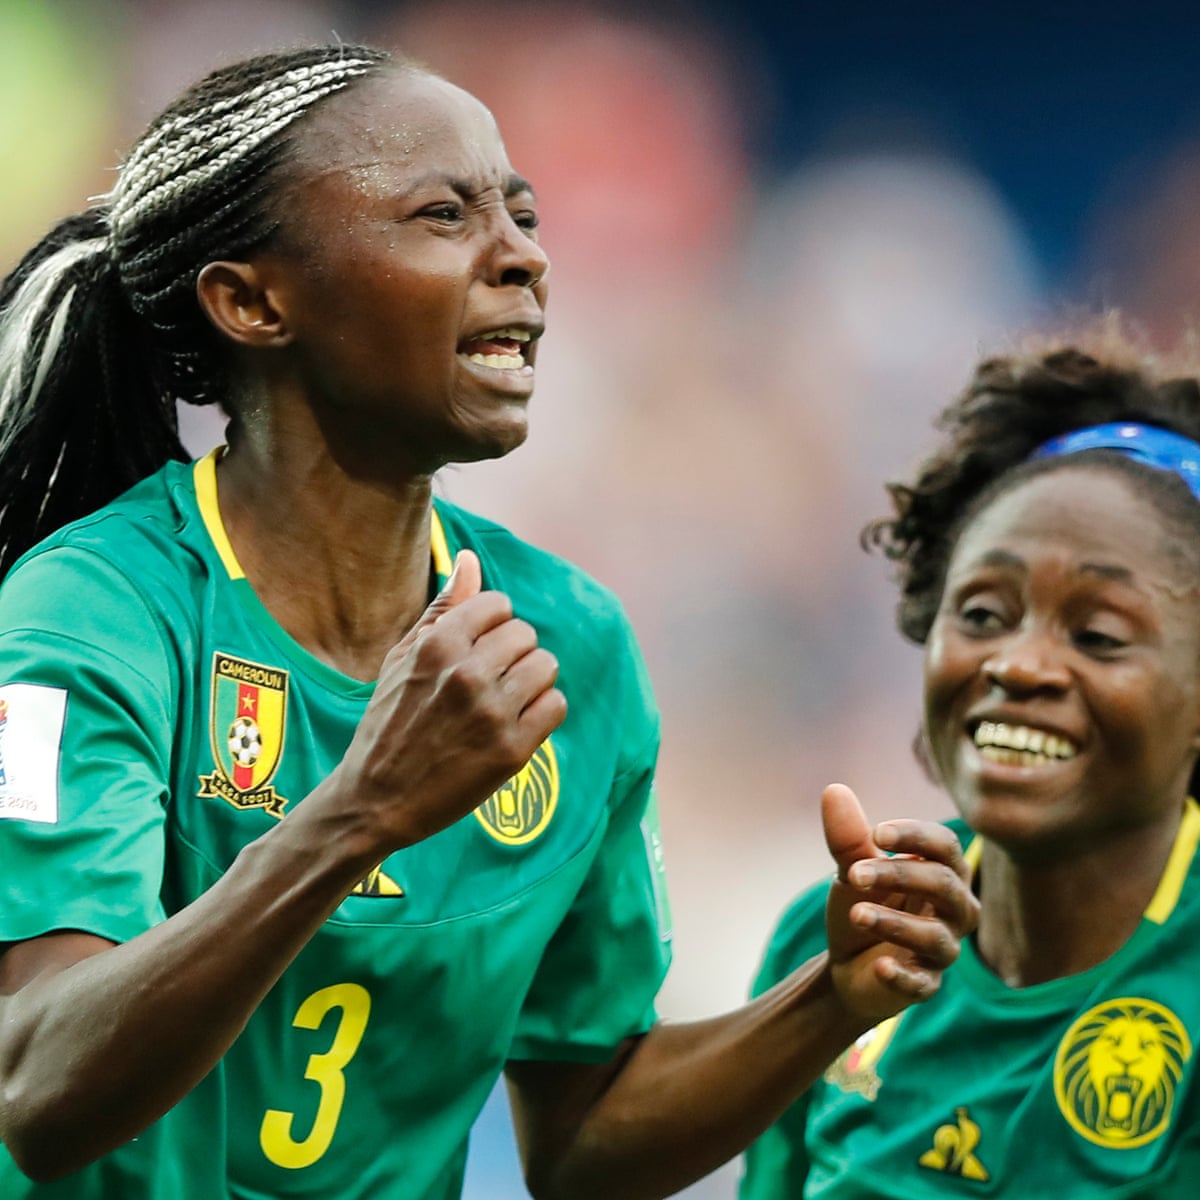 Cameroon's Nchout Ajara, a heroine on and off the pitch, can hurt England |  Cameroon women's football team | The Guardian